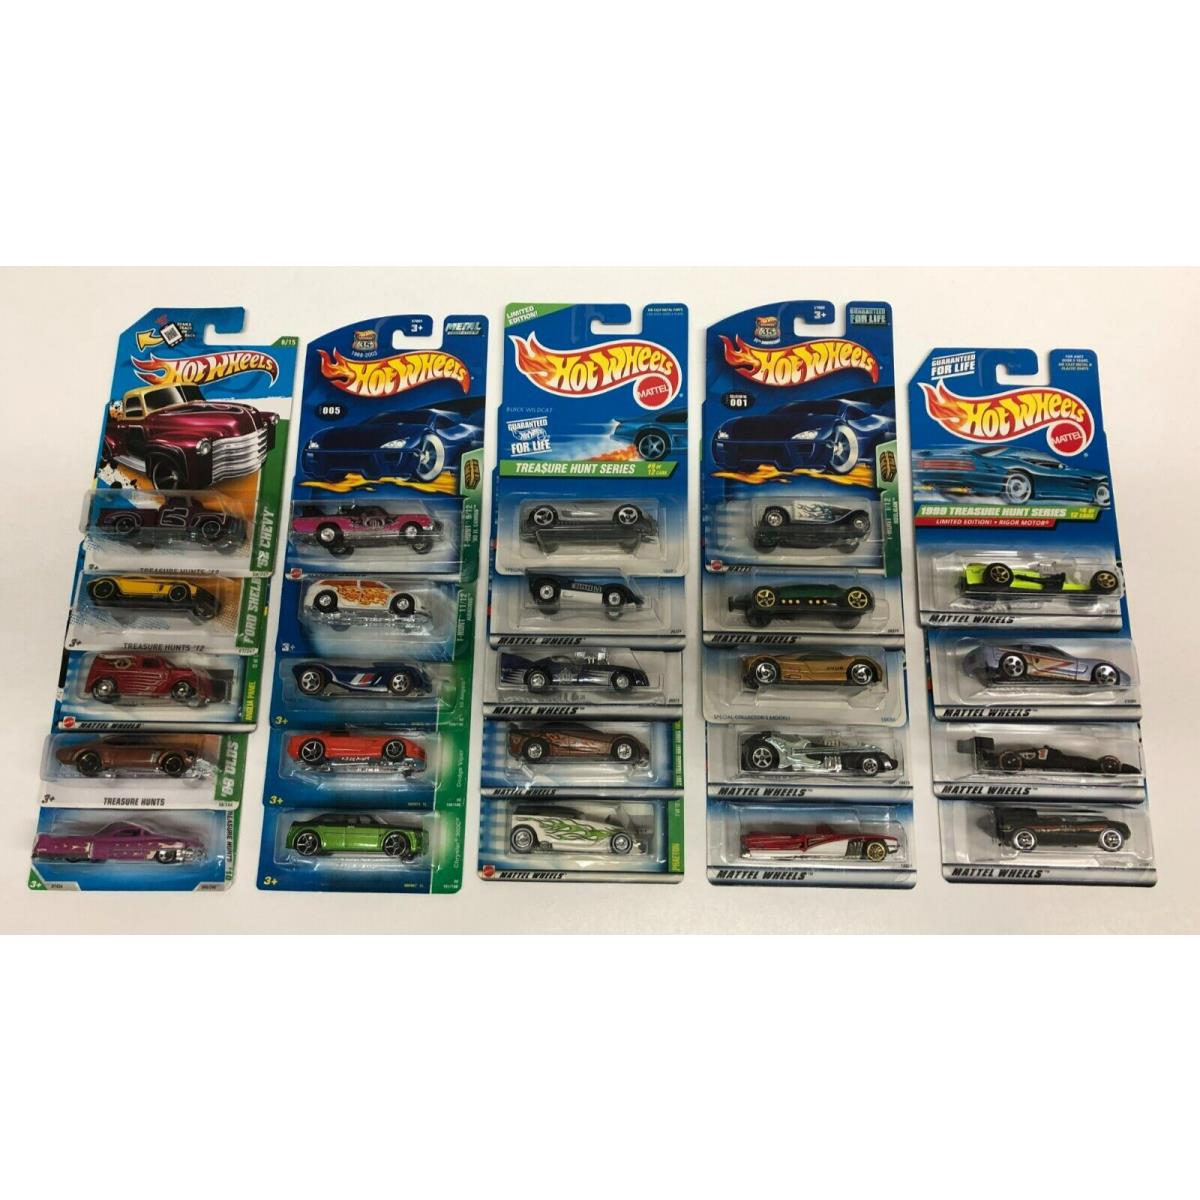 24 Different Hot Wheels Treasure Hunts Minty Condition